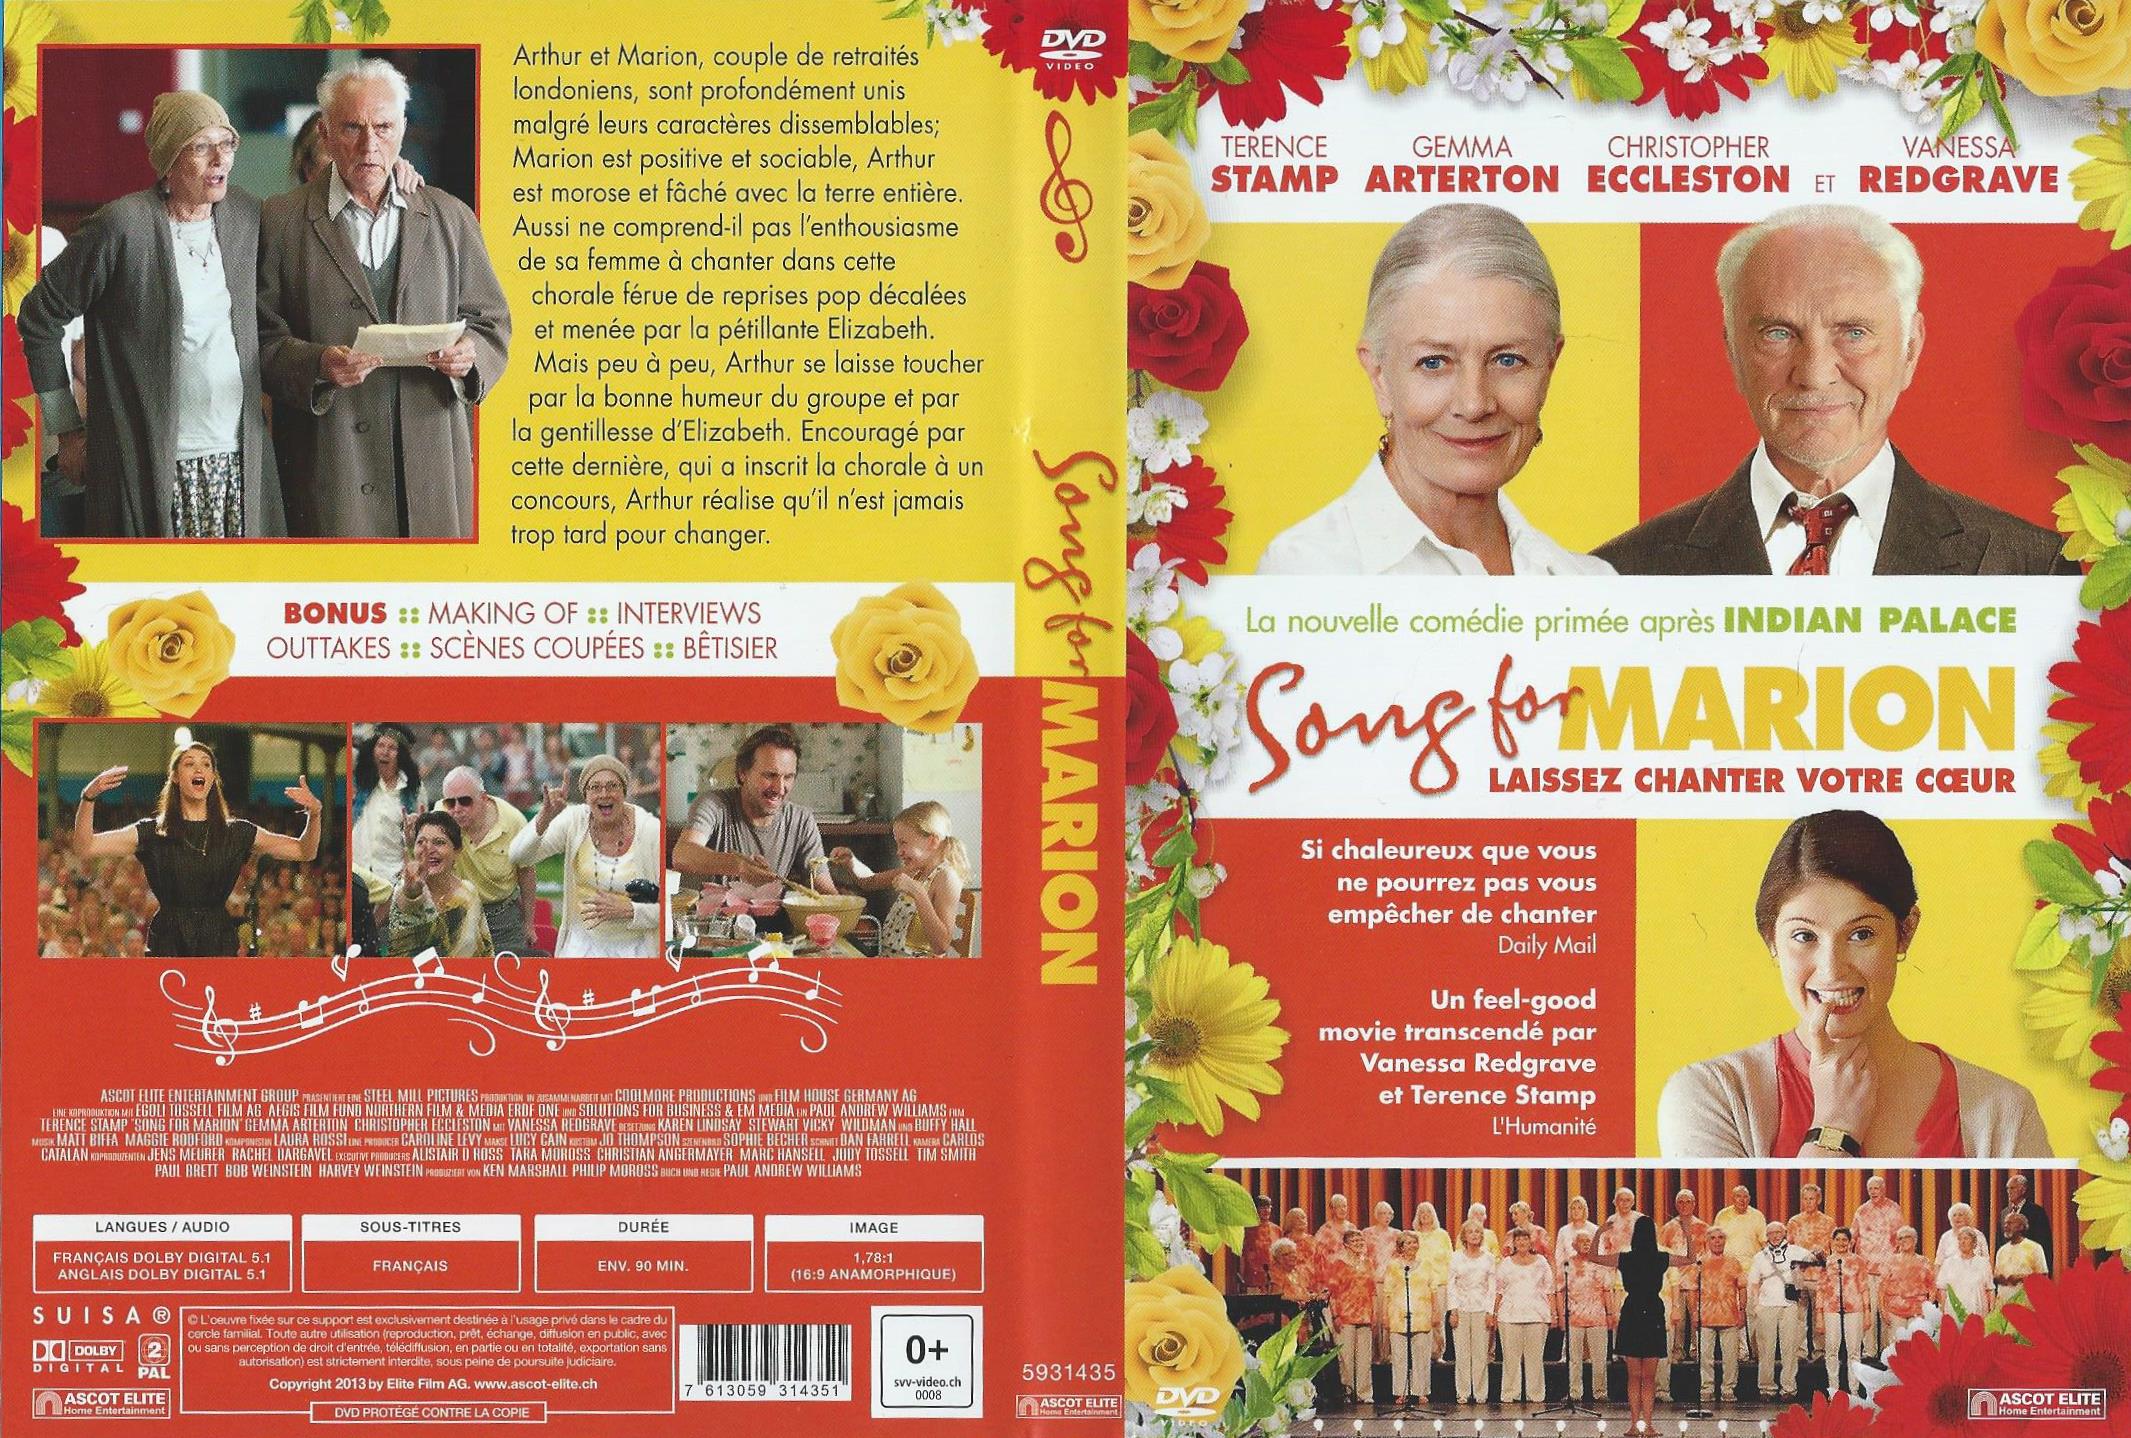 Jaquette DVD Song for Marion